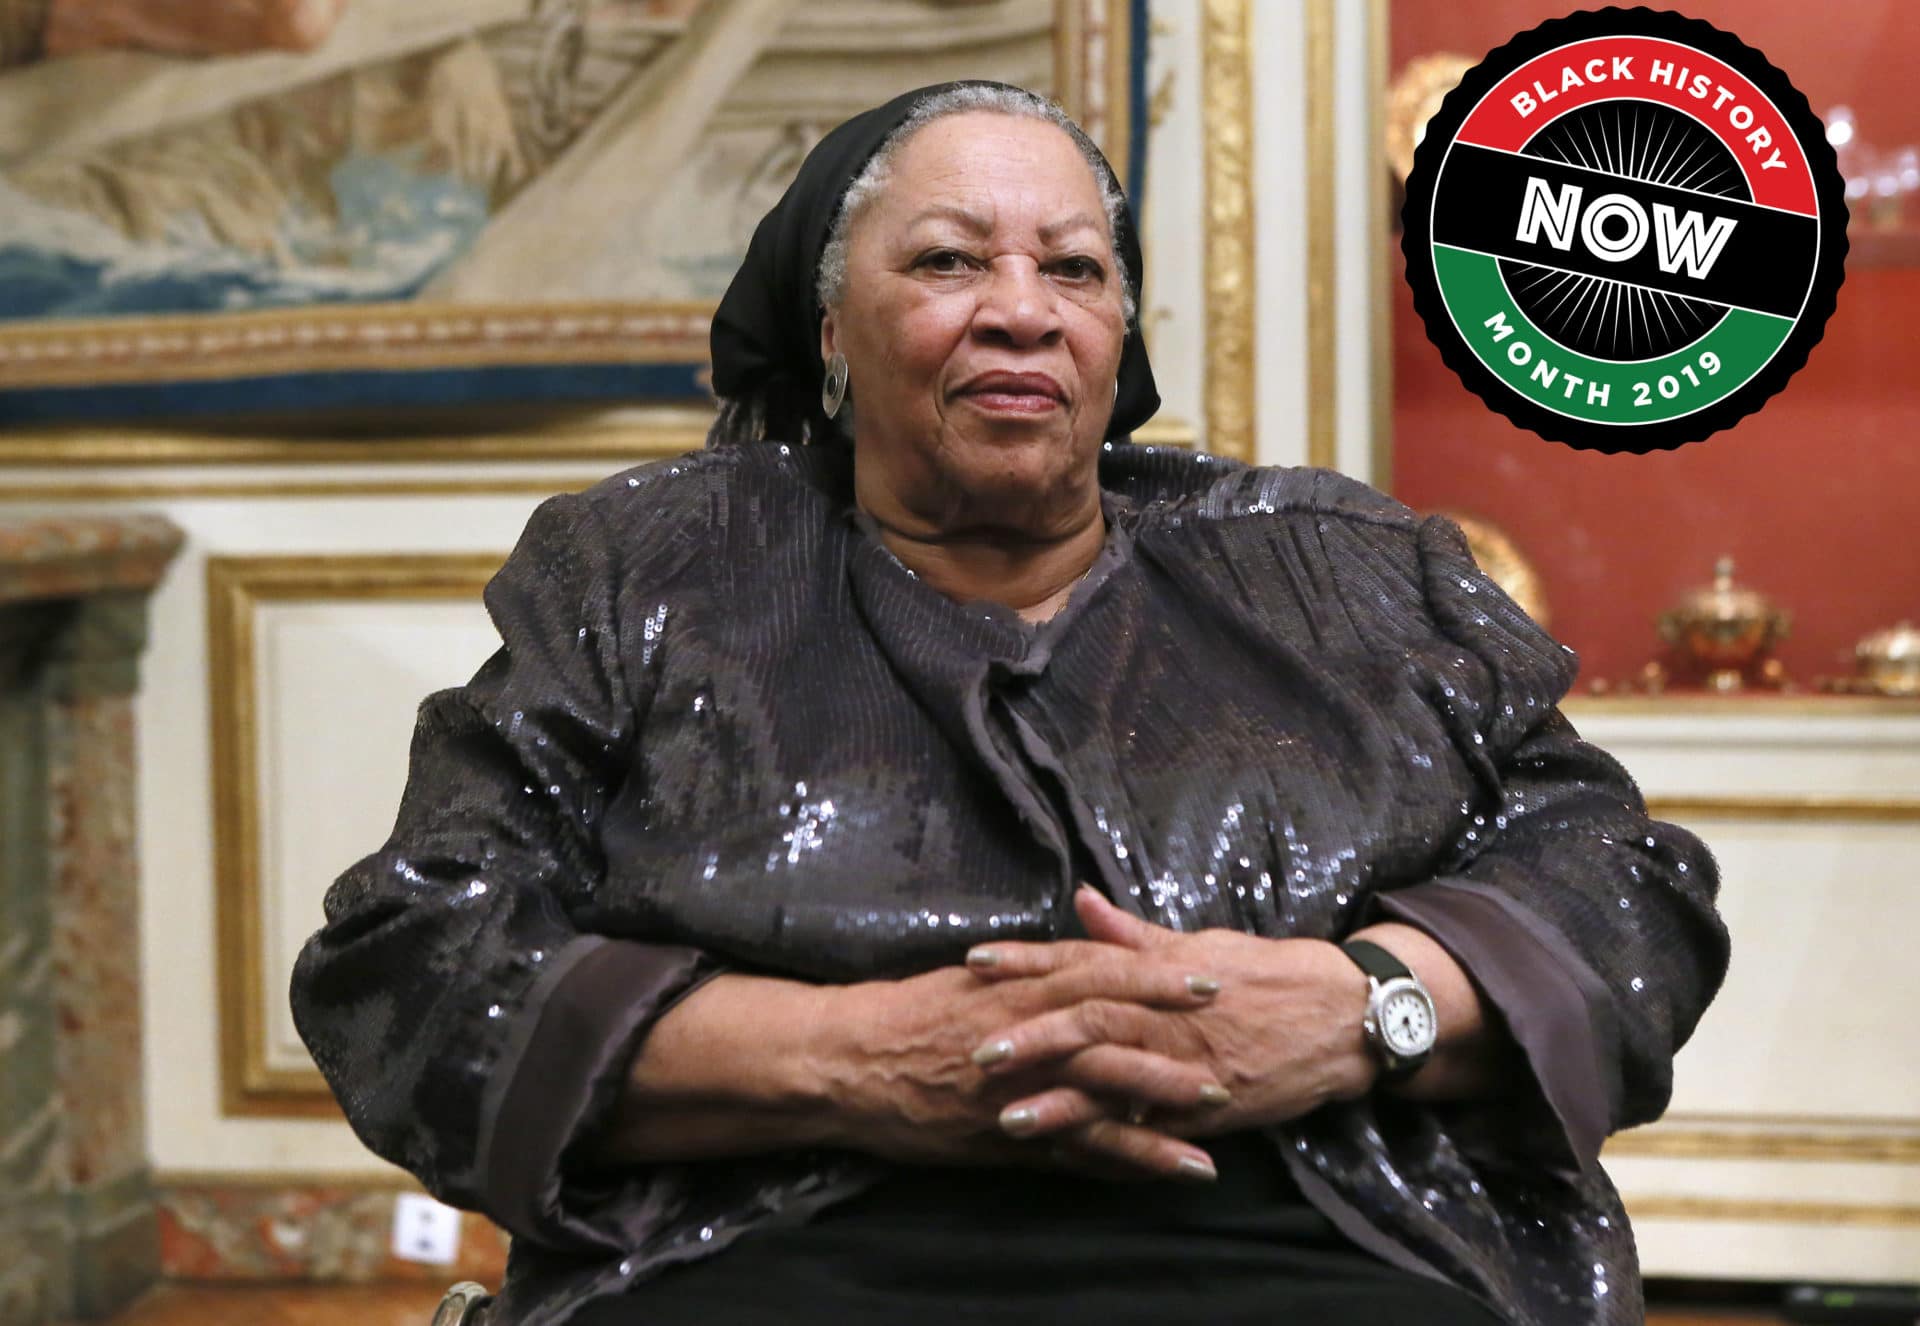 Black History Now: The Multifaceted Art Of Toni Morrison